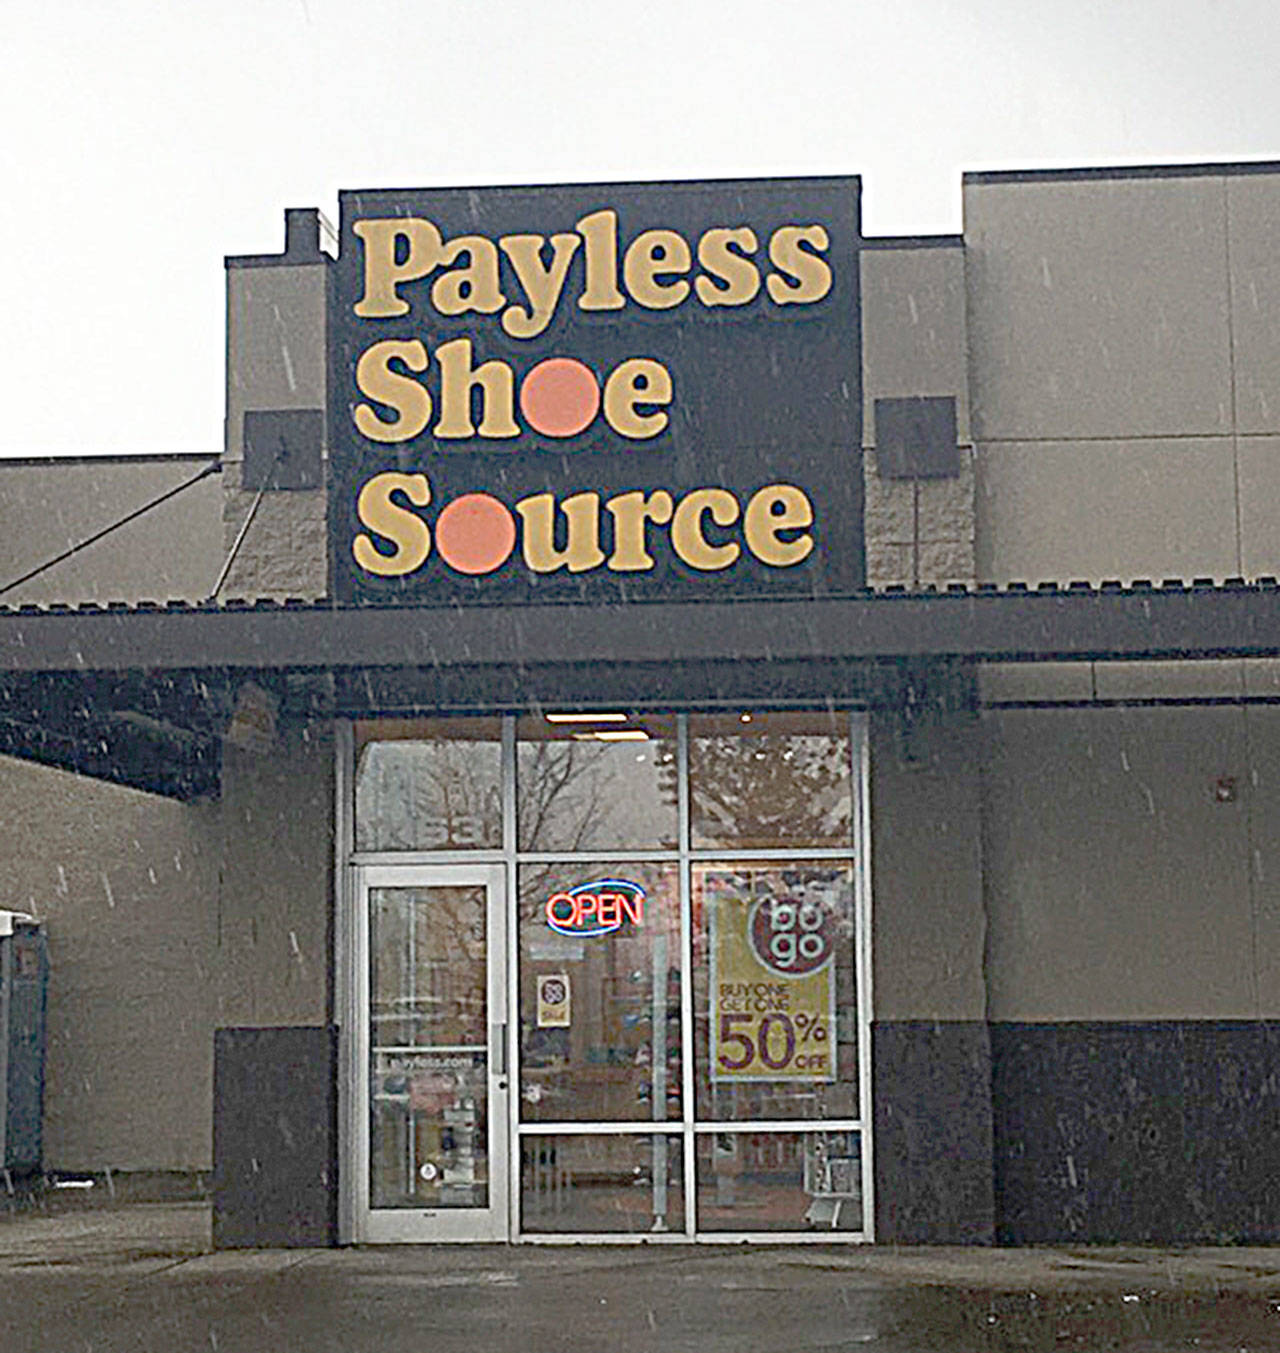 The Payless ShoeSource store in the Olympic Gateway Plaza.